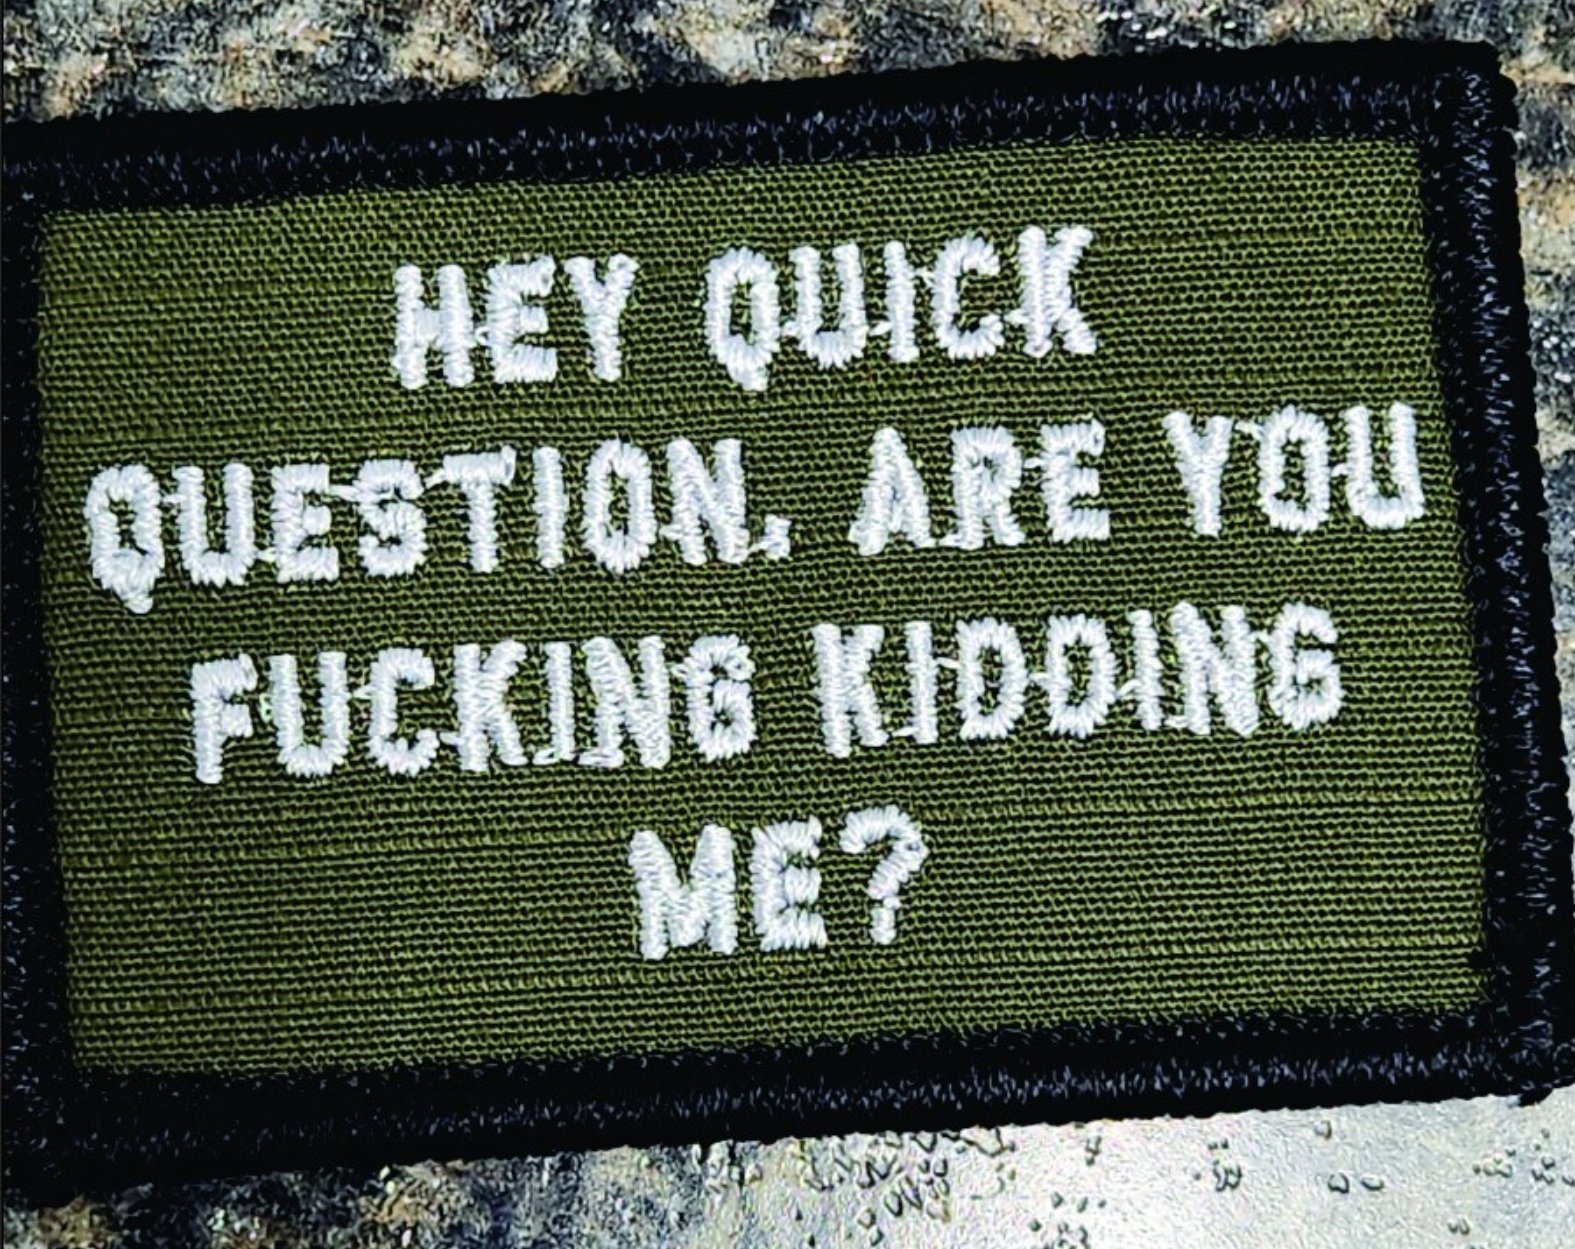 As Seen on Socials - "Hey Question, Are You Fucking Kidding Me?" - 2x3 Patch - Olive Drab w/White